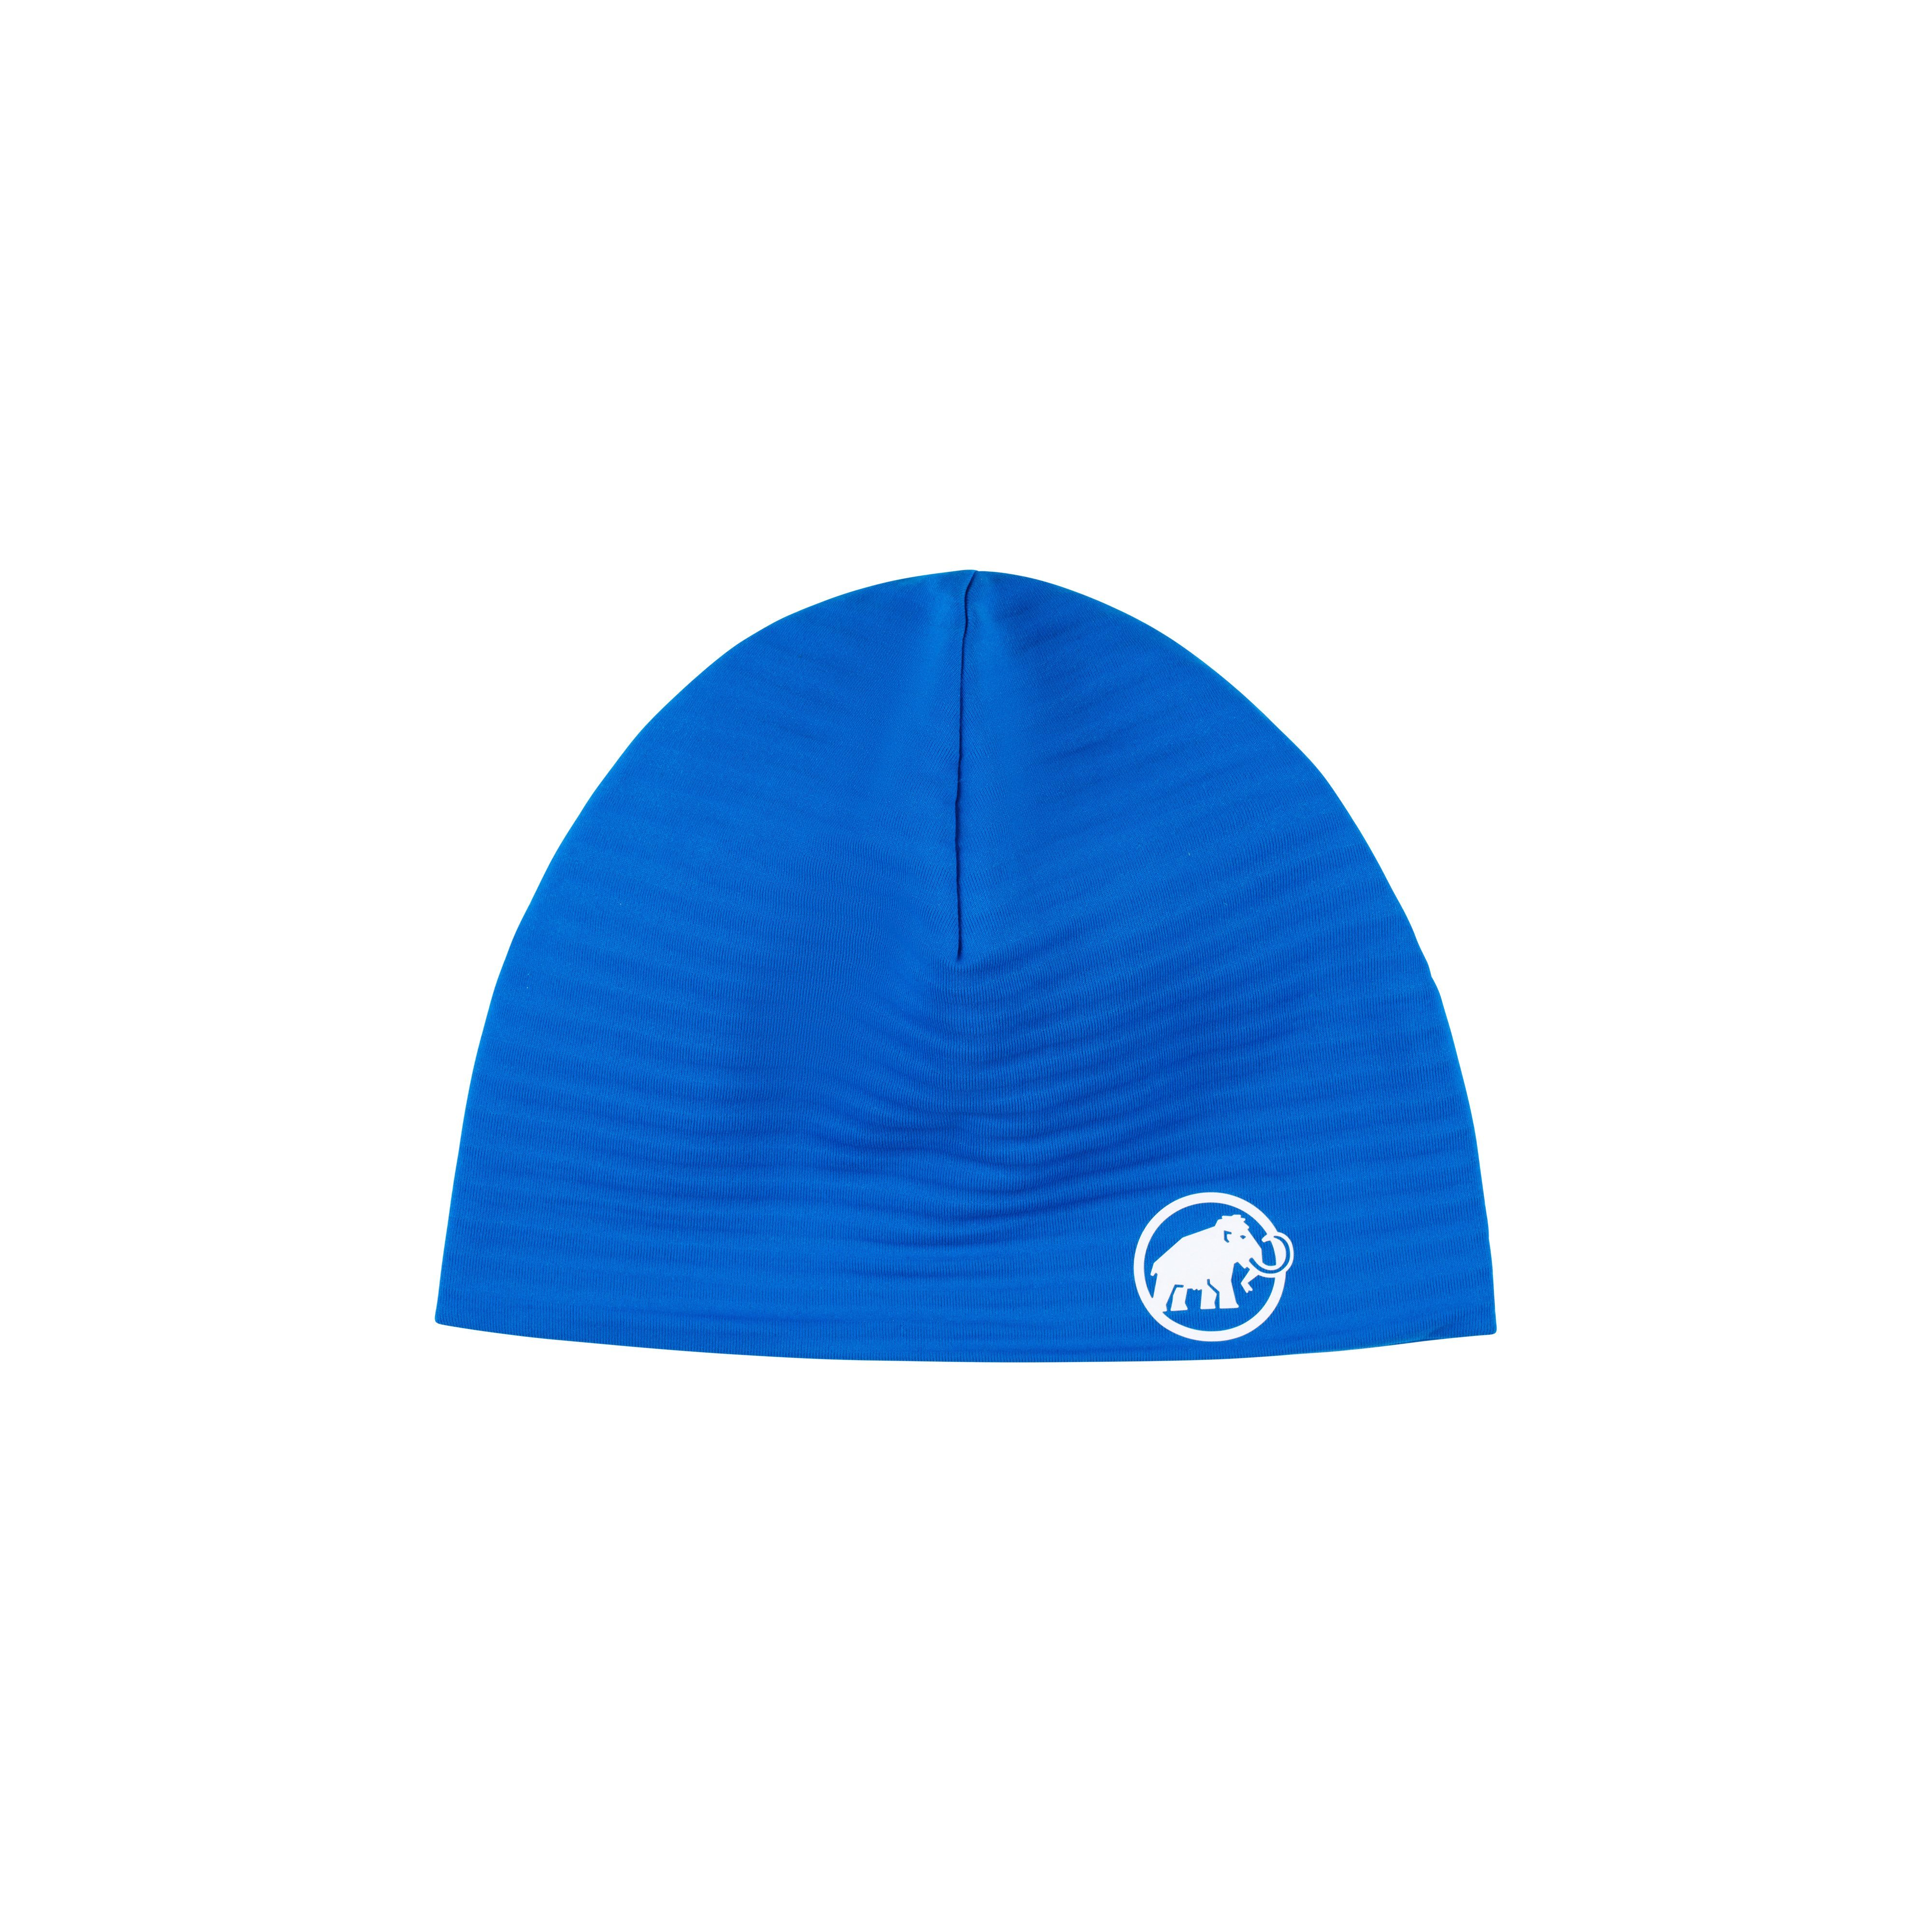 Taiss Light Beanie - ice, one size product image